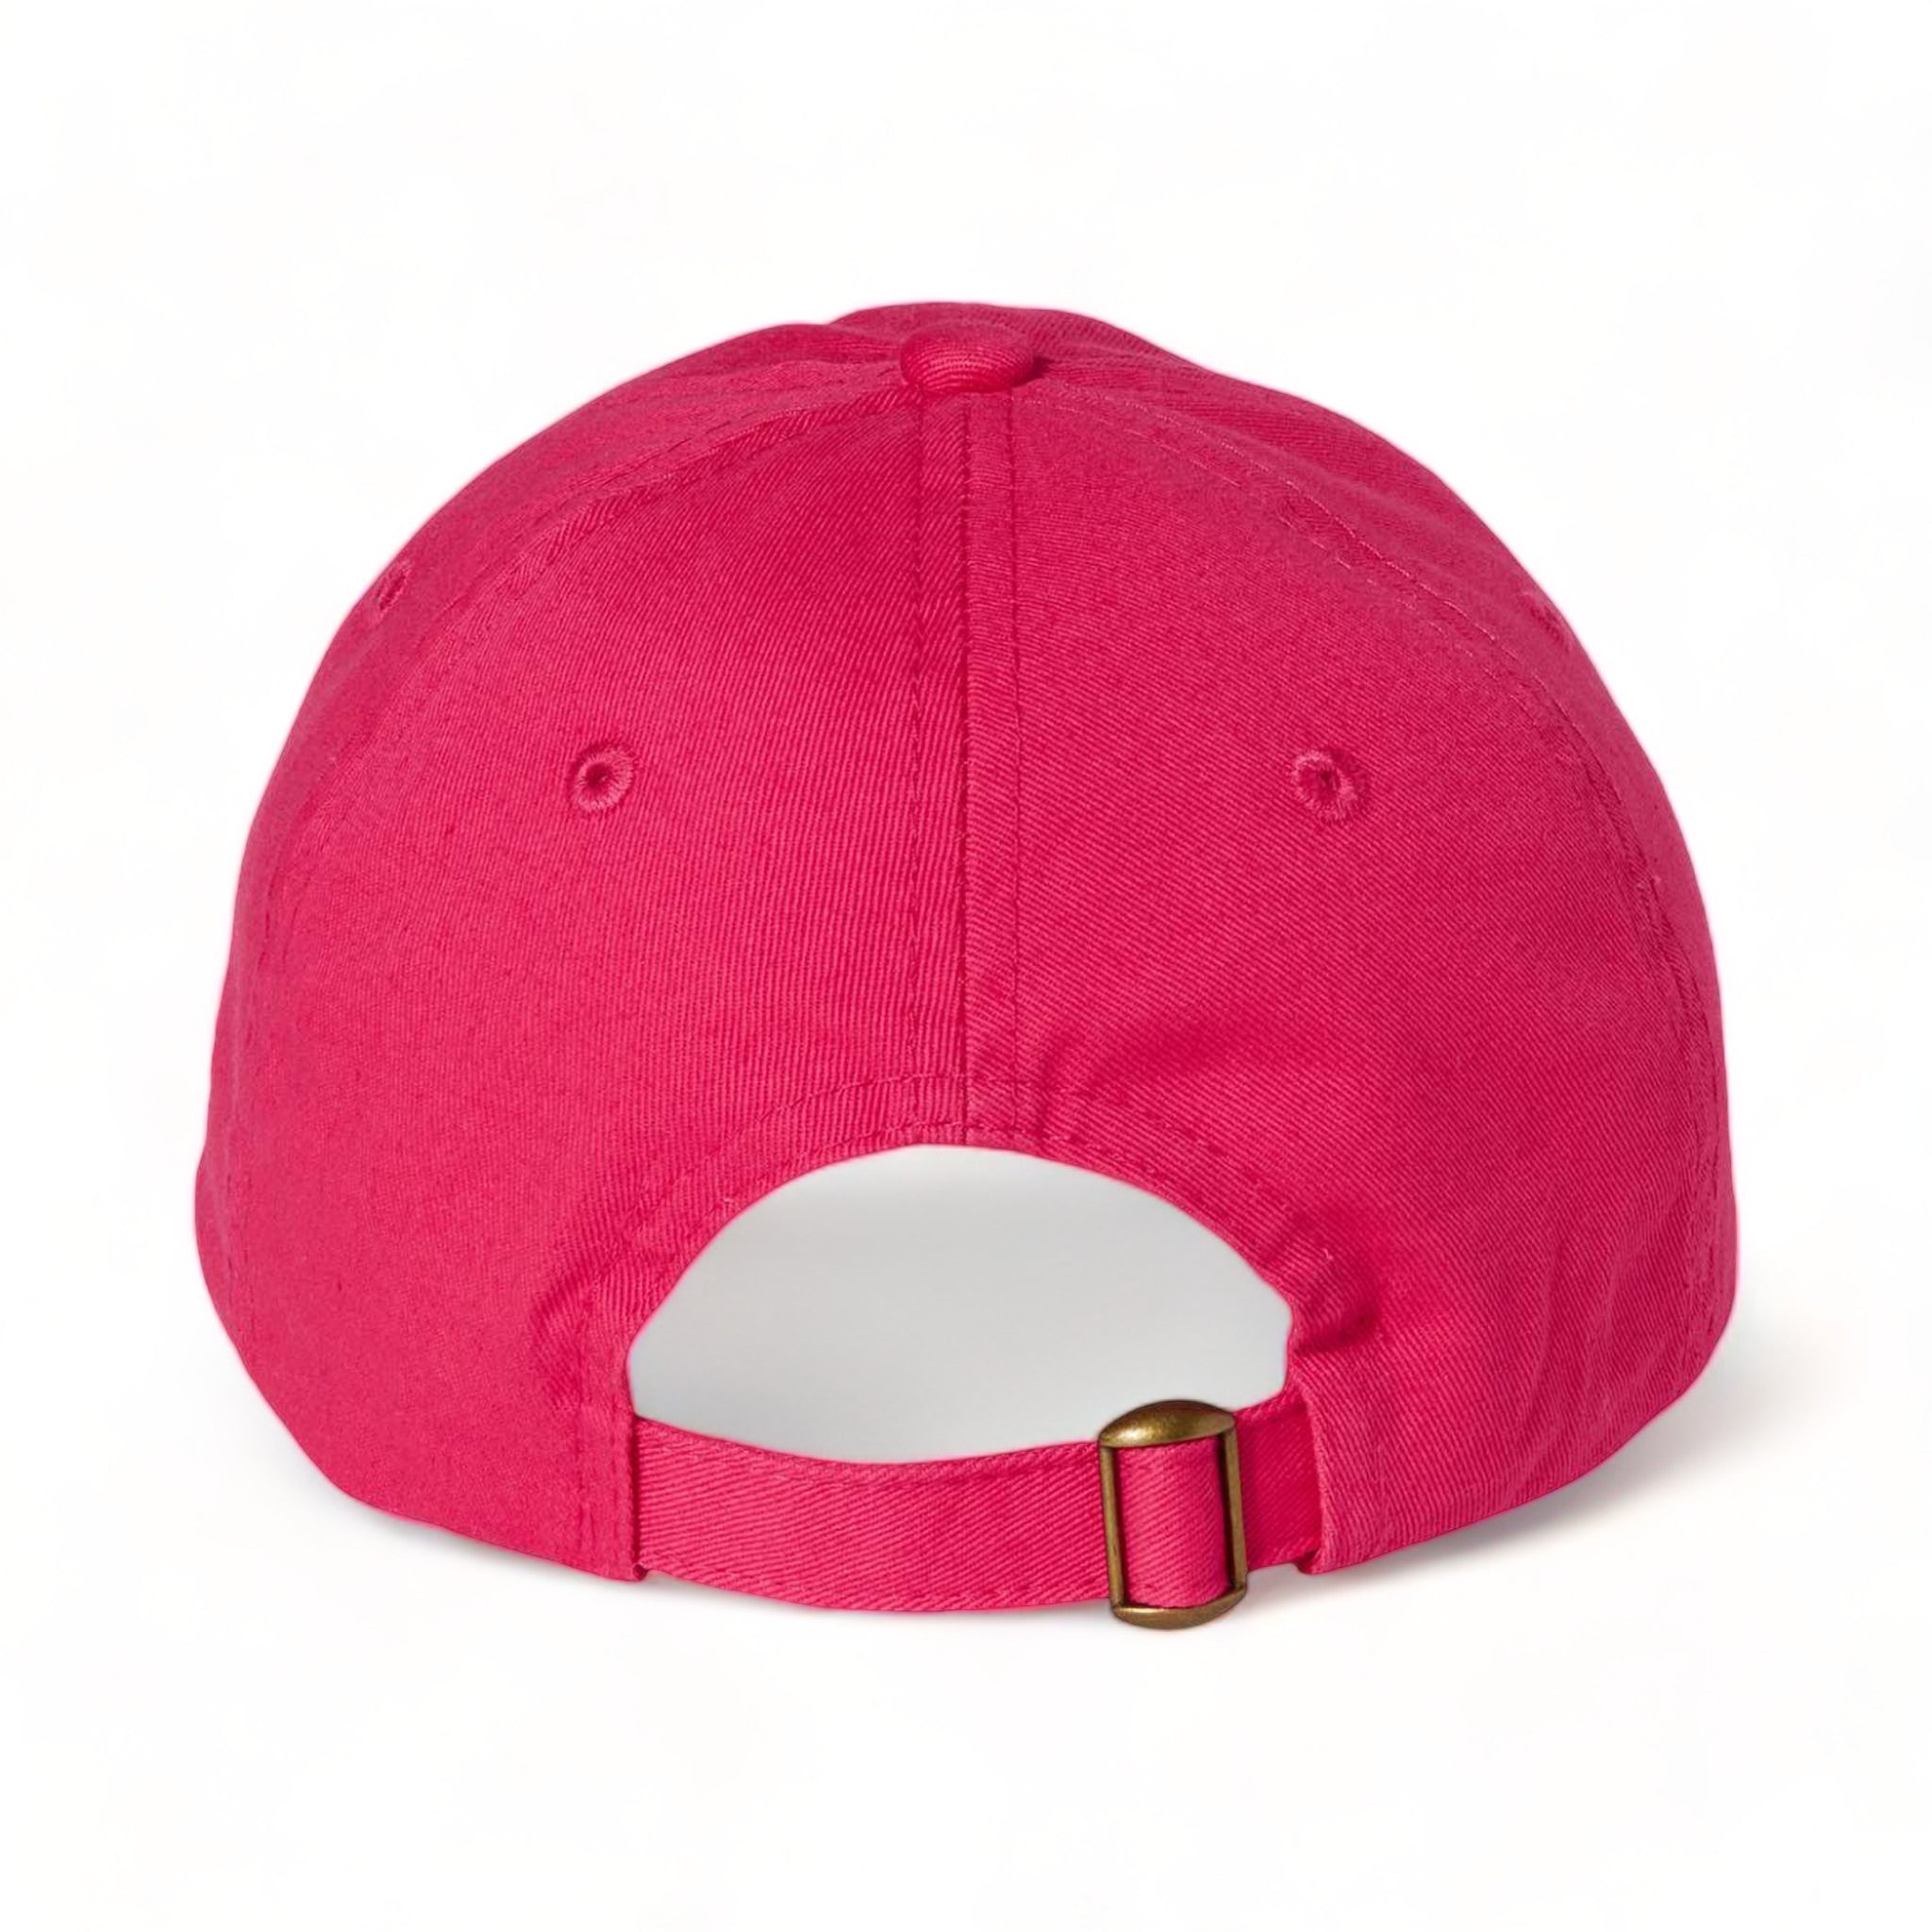 Back view of Valucap VC300A custom hat in neon pink